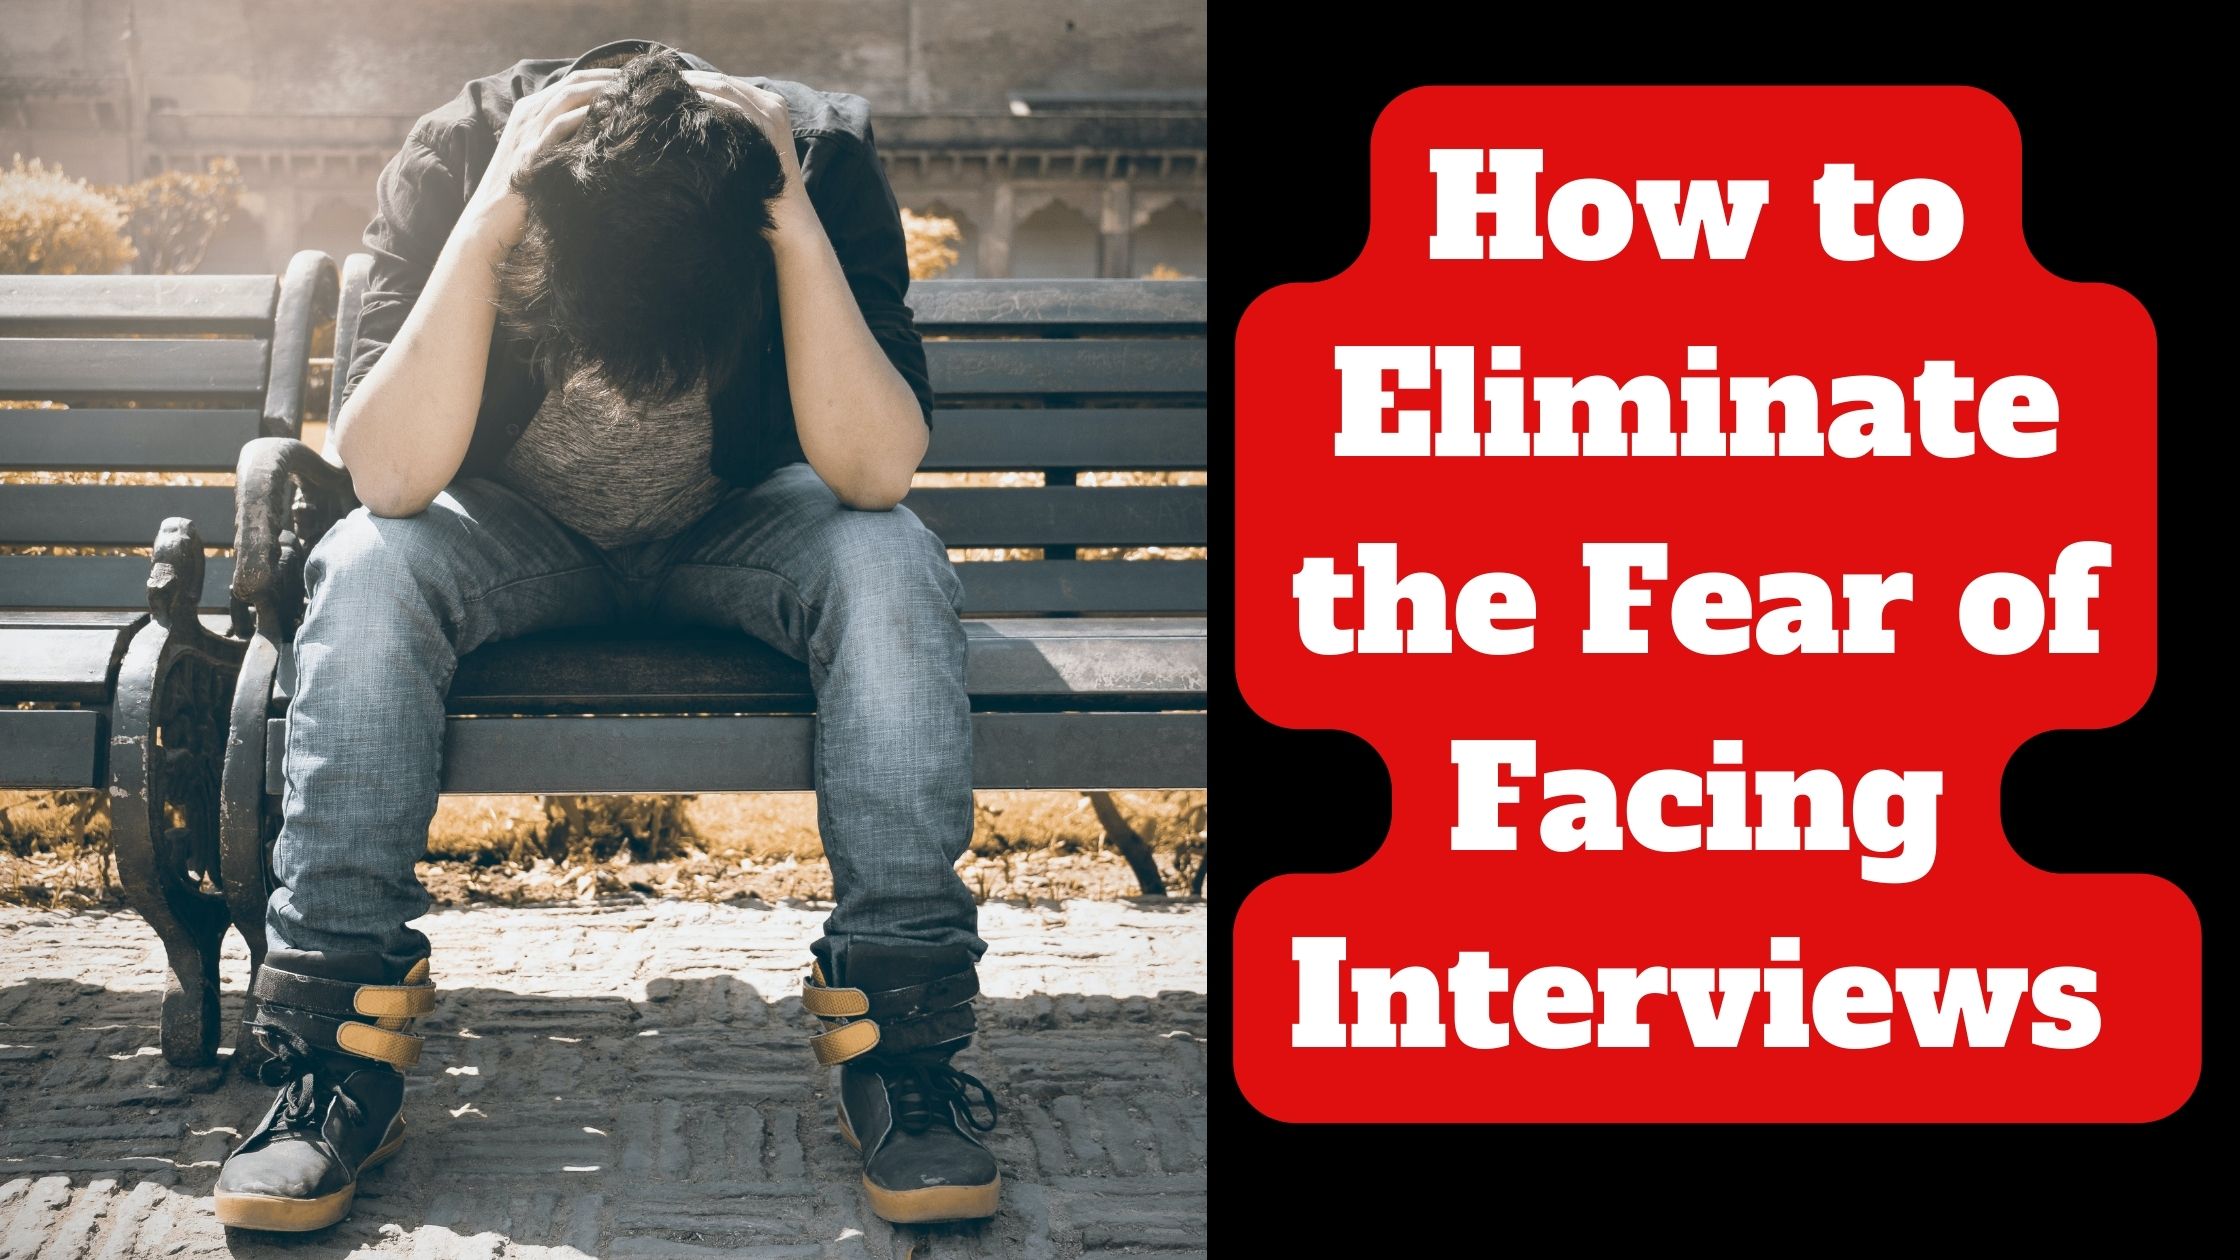 How to Eliminate the Fear of Facing Interviews